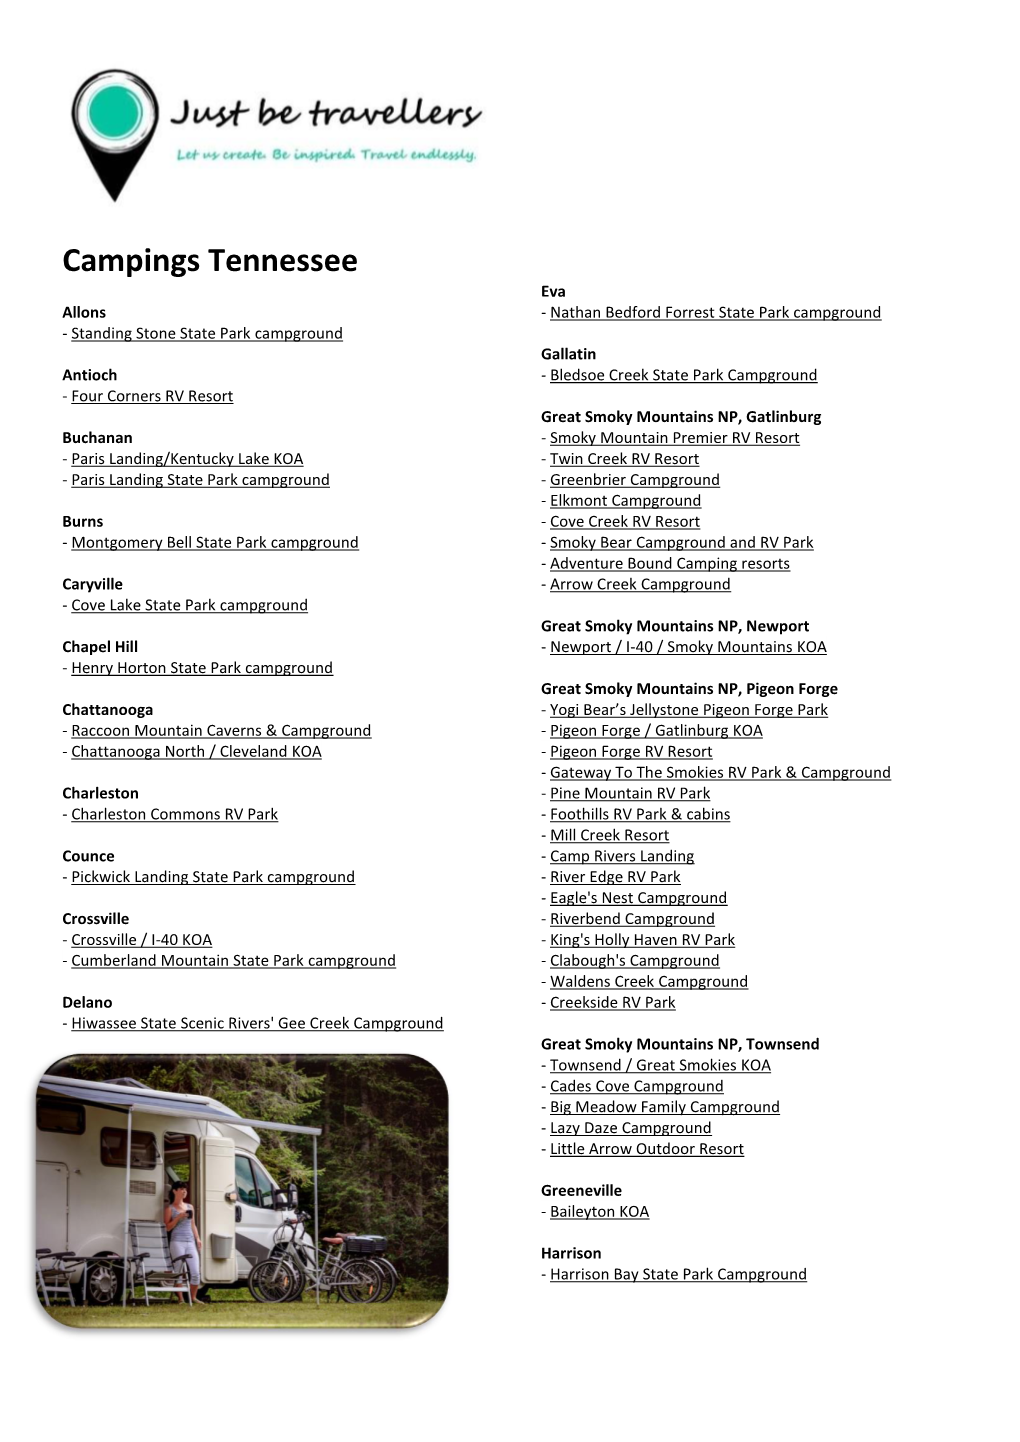 Campings Tennessee